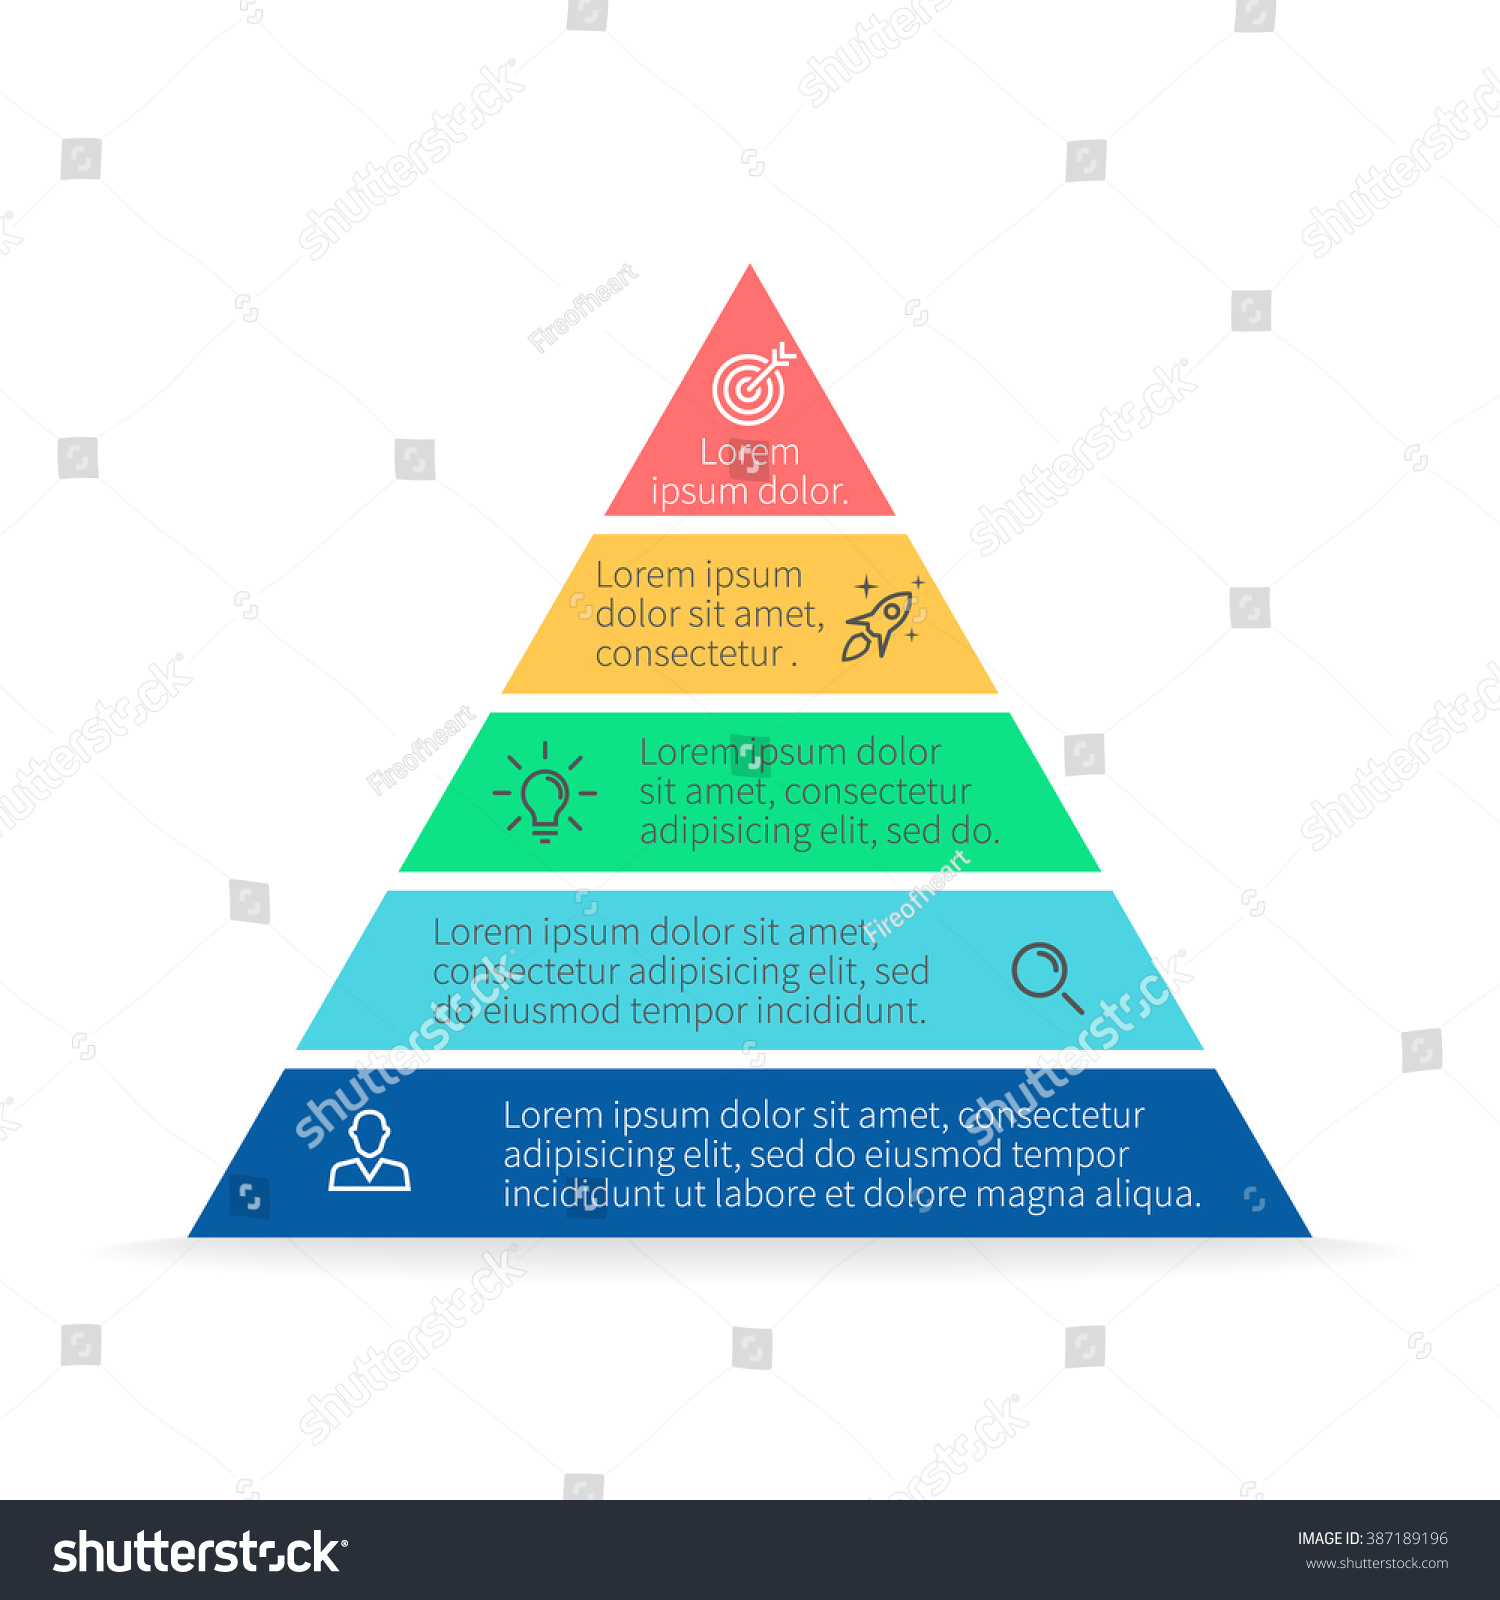 210 5 Section Triangle Images, Stock Photos & Vectors | Shutterstock